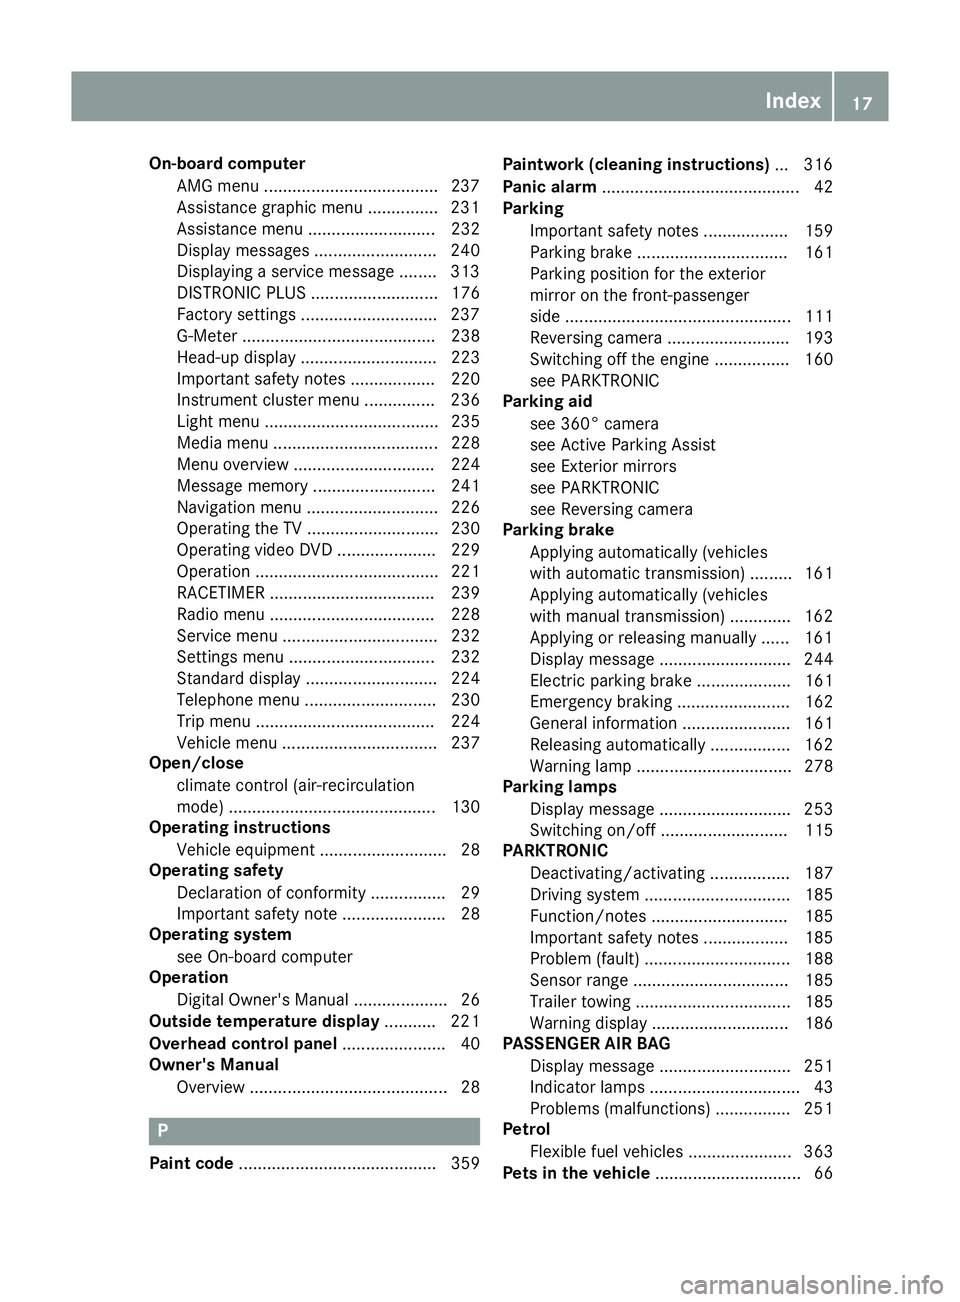 MERCEDES-BENZ C-CLASS CABRIOLET 2016  Owners Manual On-board computer
AMG menu .....................................2 37
Assistance graphic menu .............. .231
Assistance menu ........................... 232
Display messages ......................